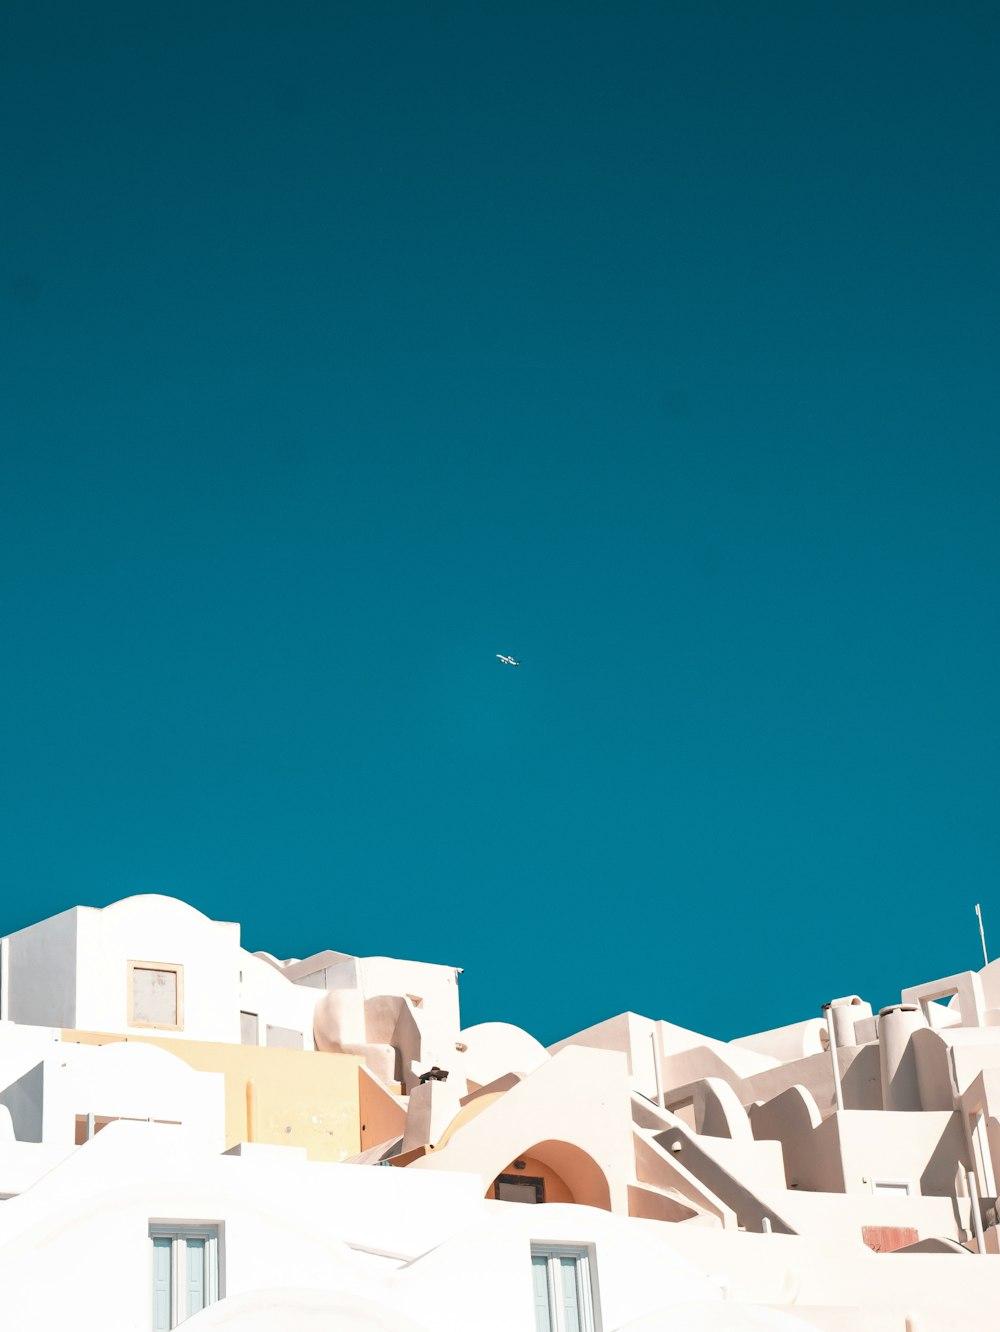 White Concrete Building Under Blue Sky During Daytime Photo